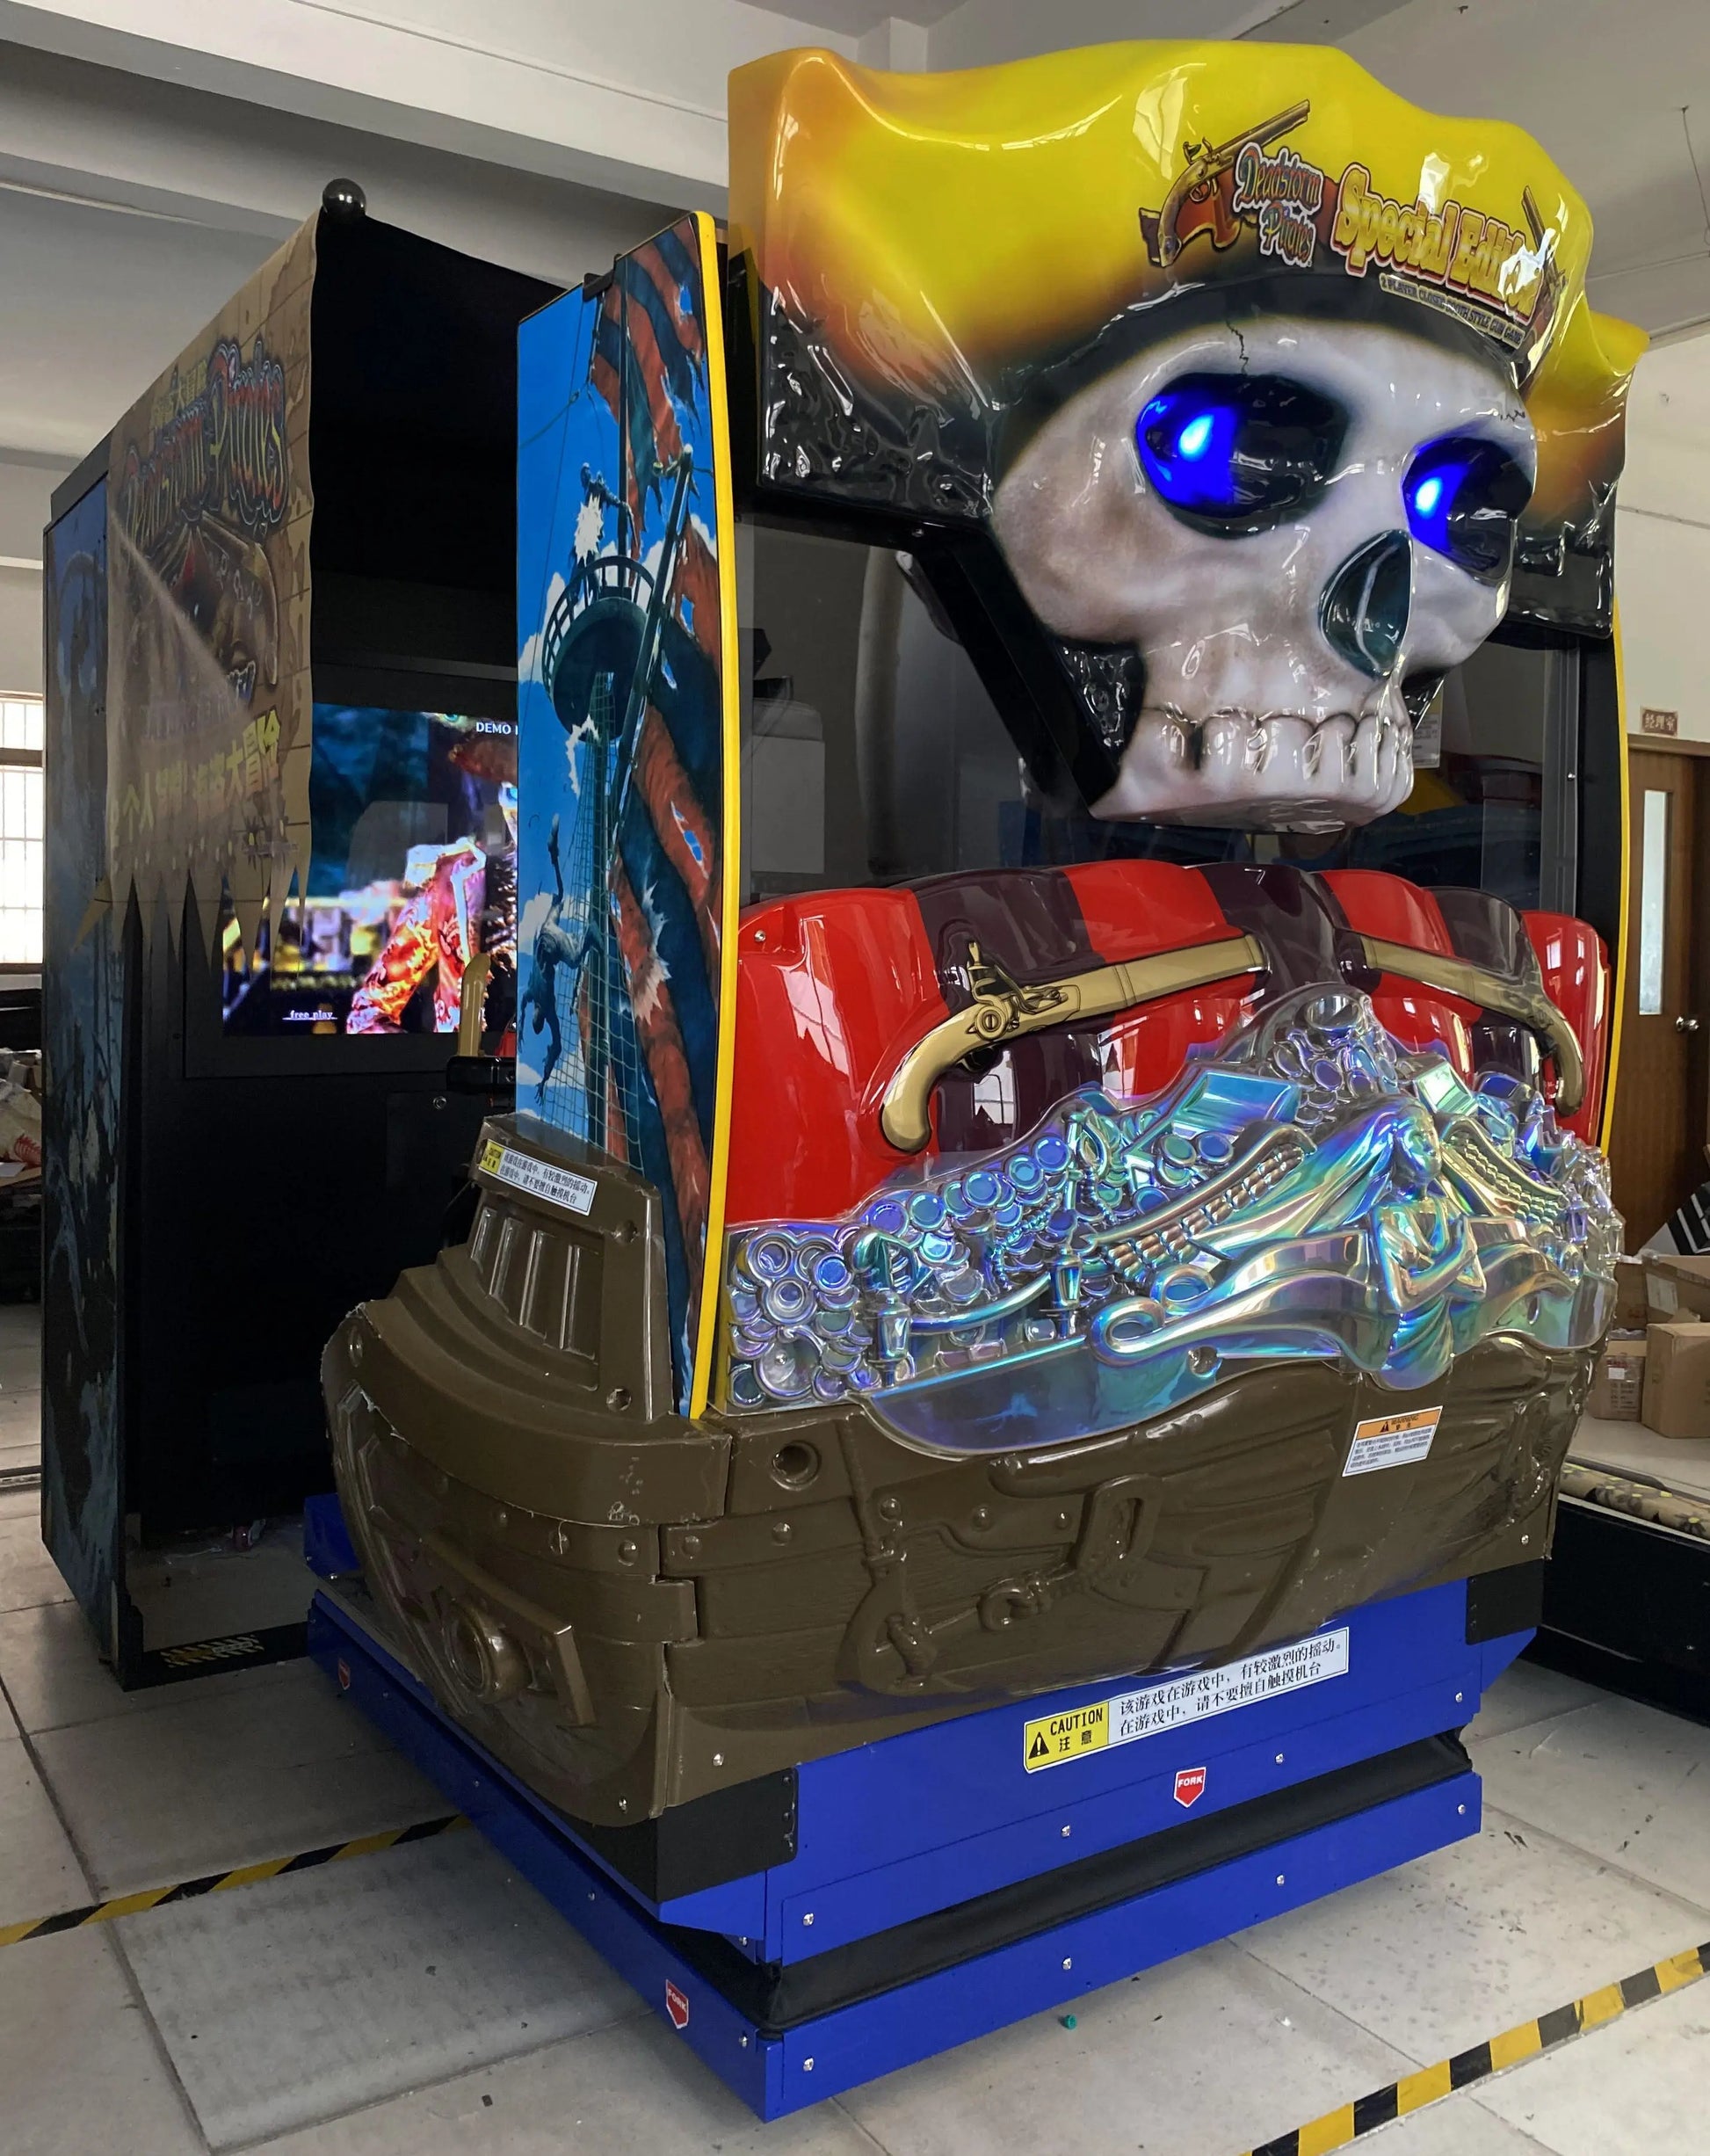 Dead-storm-Pirates-Shooting-Gun-Game-Machine-With-Dynamic-platform-Specal-Edition-Special-Coin-Operated-Wholesales-Arcade-Games-Tomy-Arcade